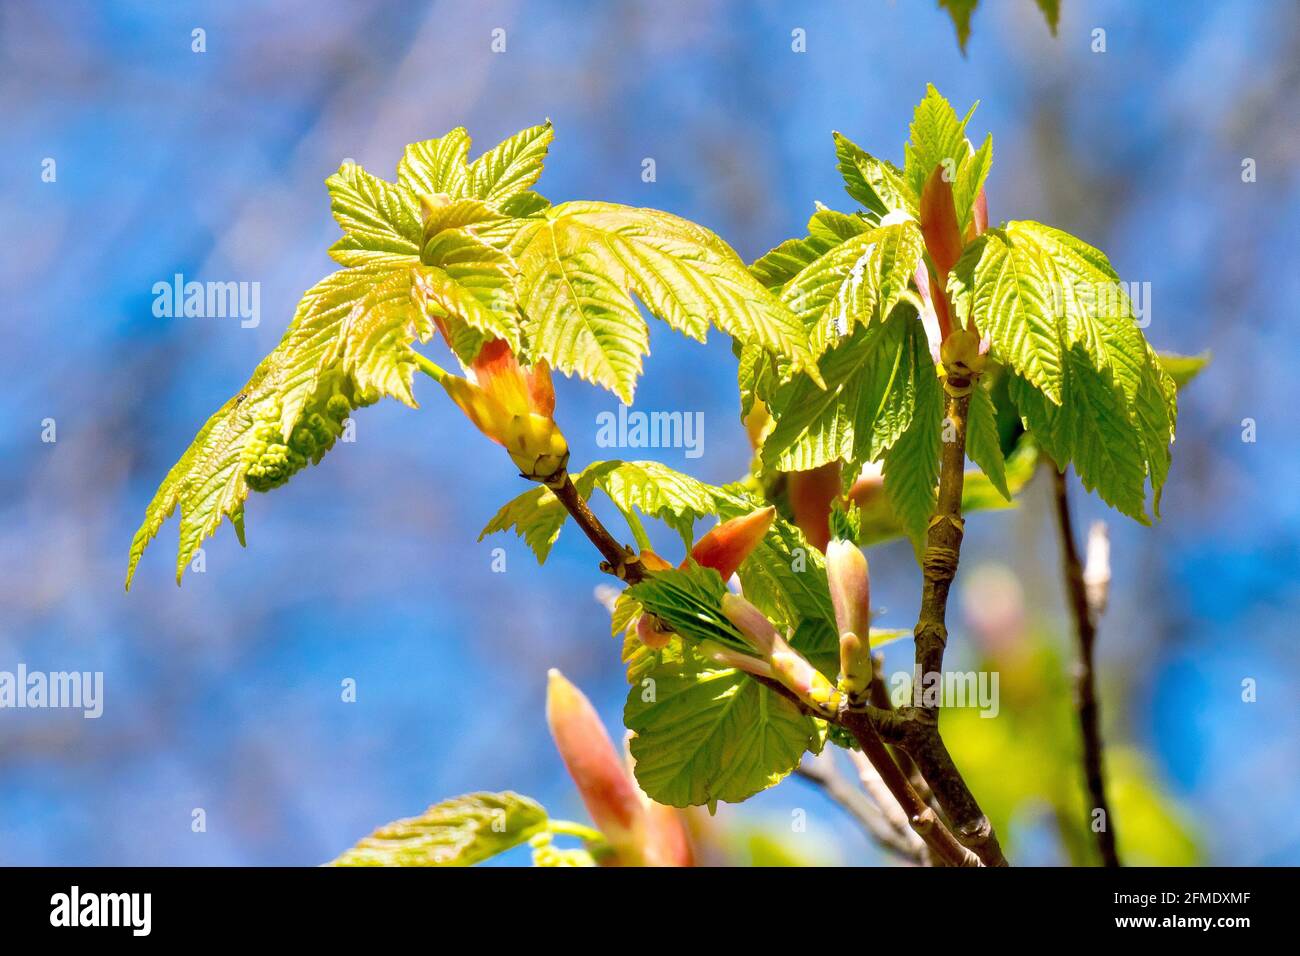 Sycamore (acer pseudoplatanus), close up of the new leaves appearing on the tree in spring against a blue sky. Stock Photo